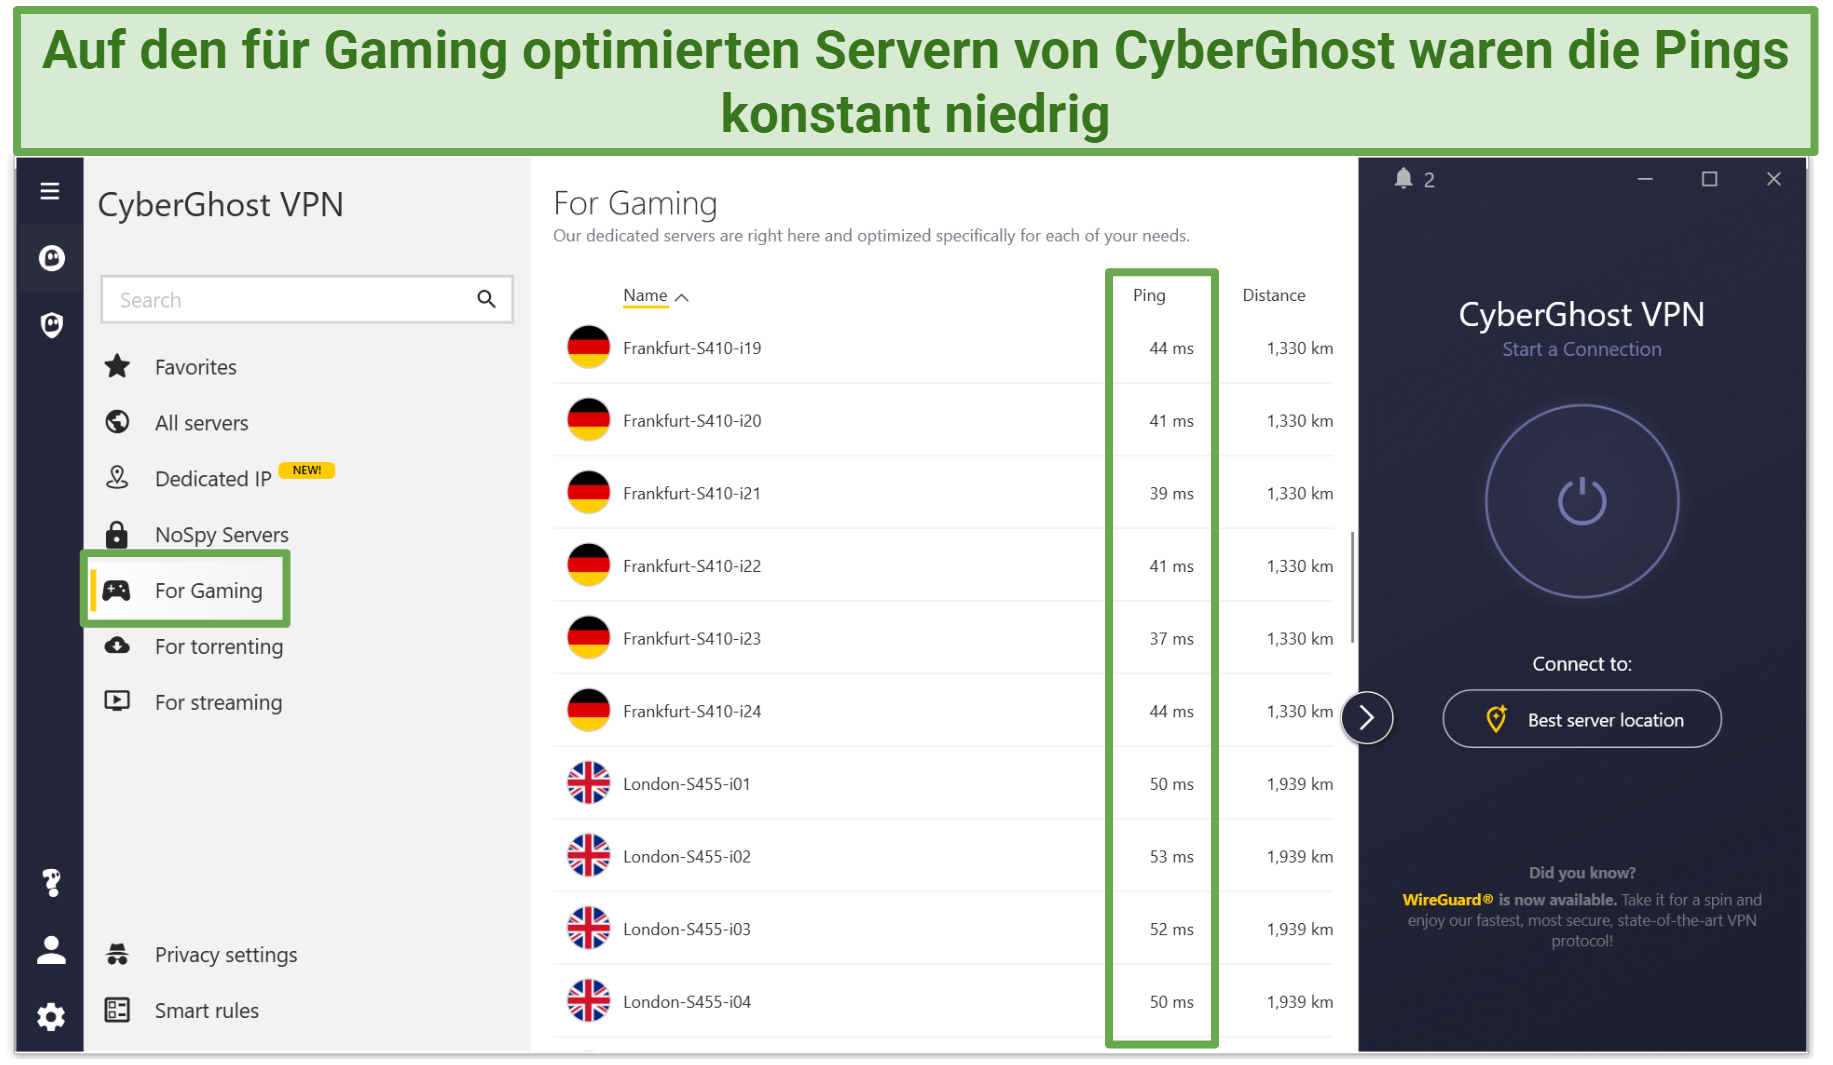 A screenshot showing some of CyberGhost's gaming-optimized servers